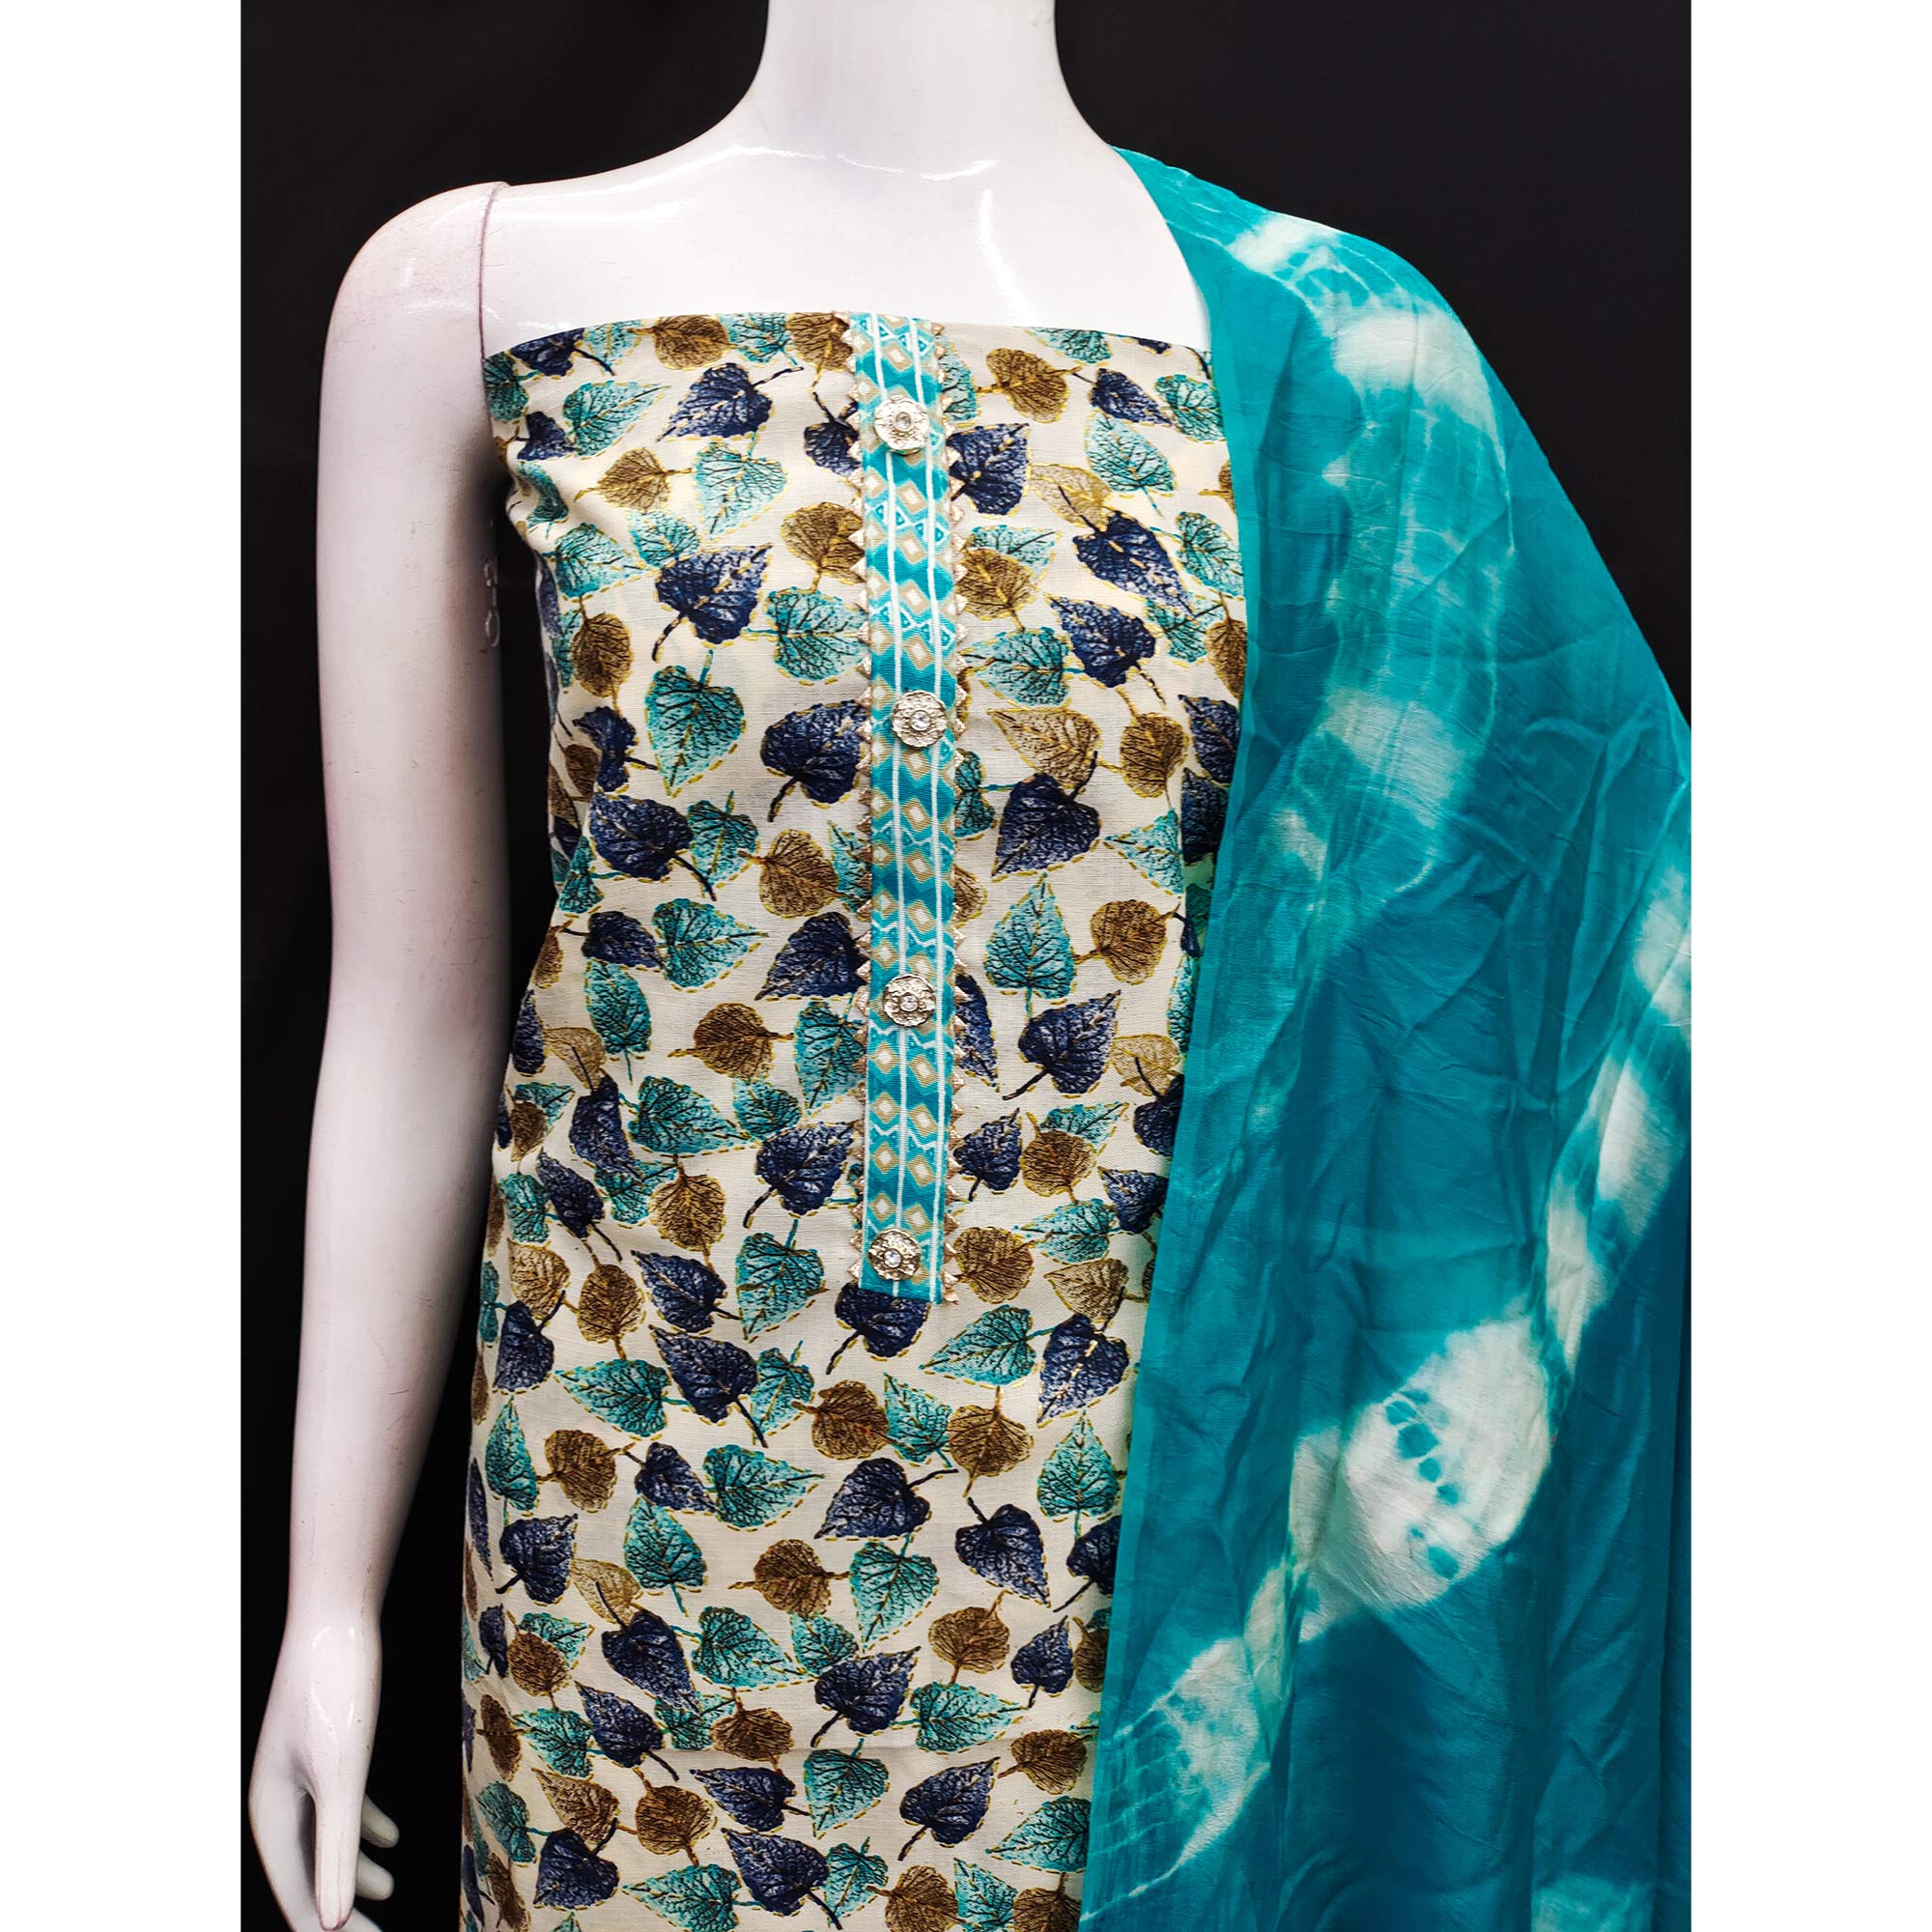 Turquoise Foil Printed Cotton Blend Dress Material